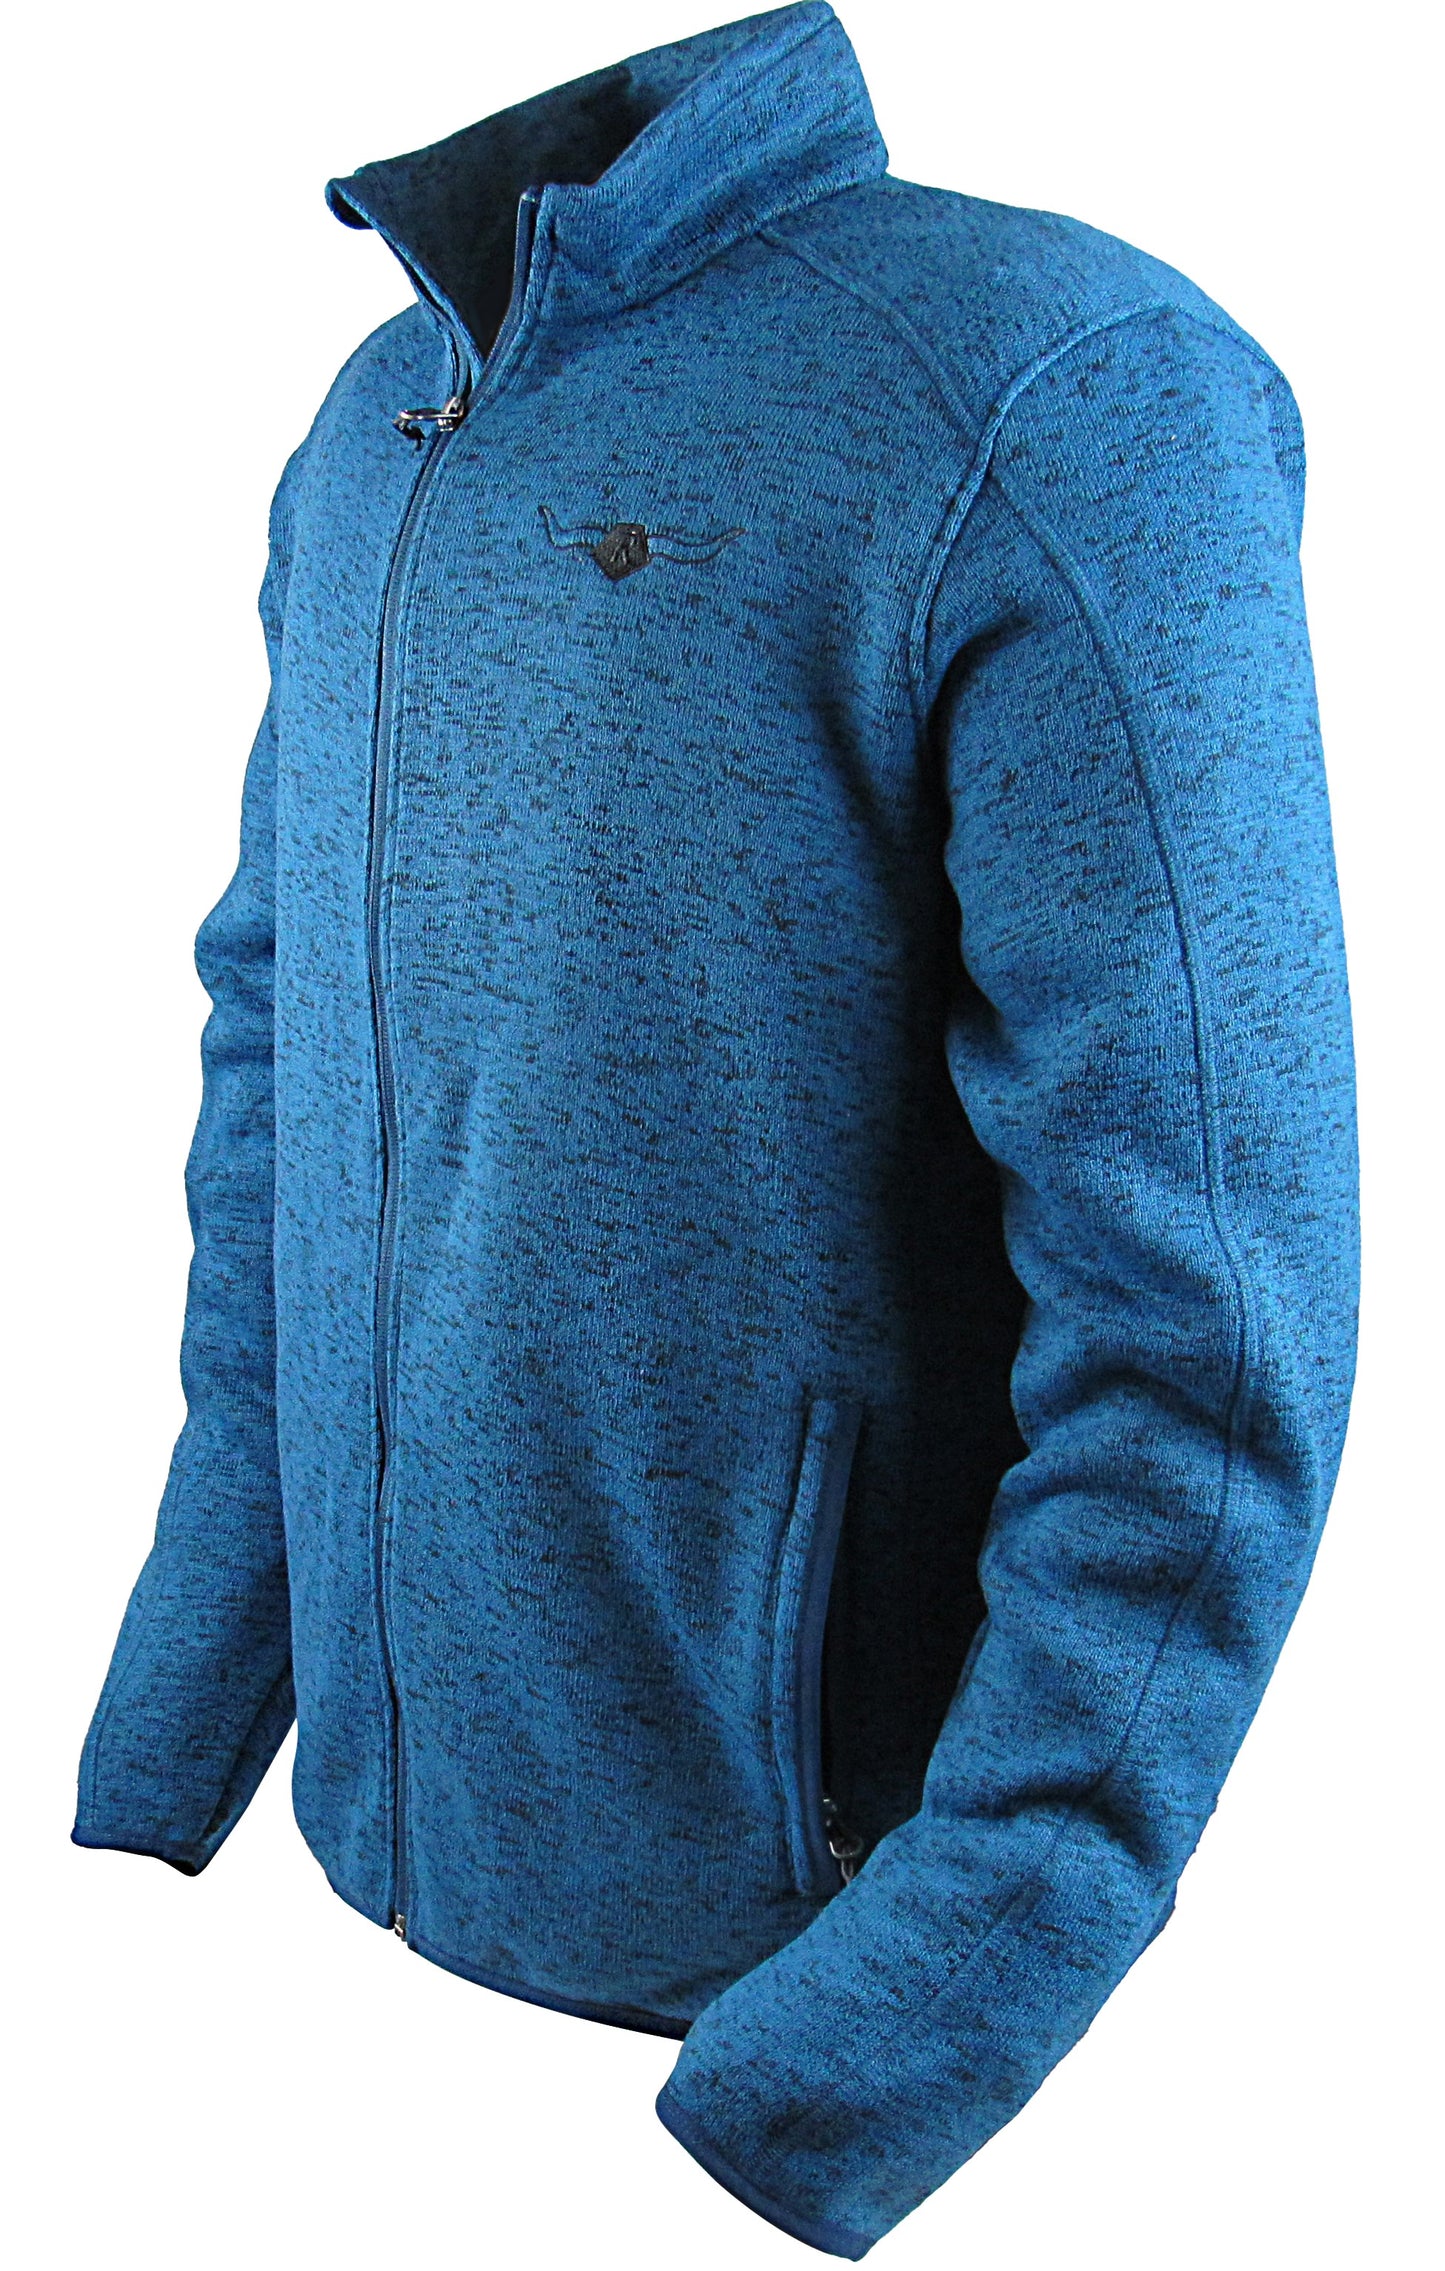 Fleece jacket with pockets and Flying R embroidery on chest in power blue heather